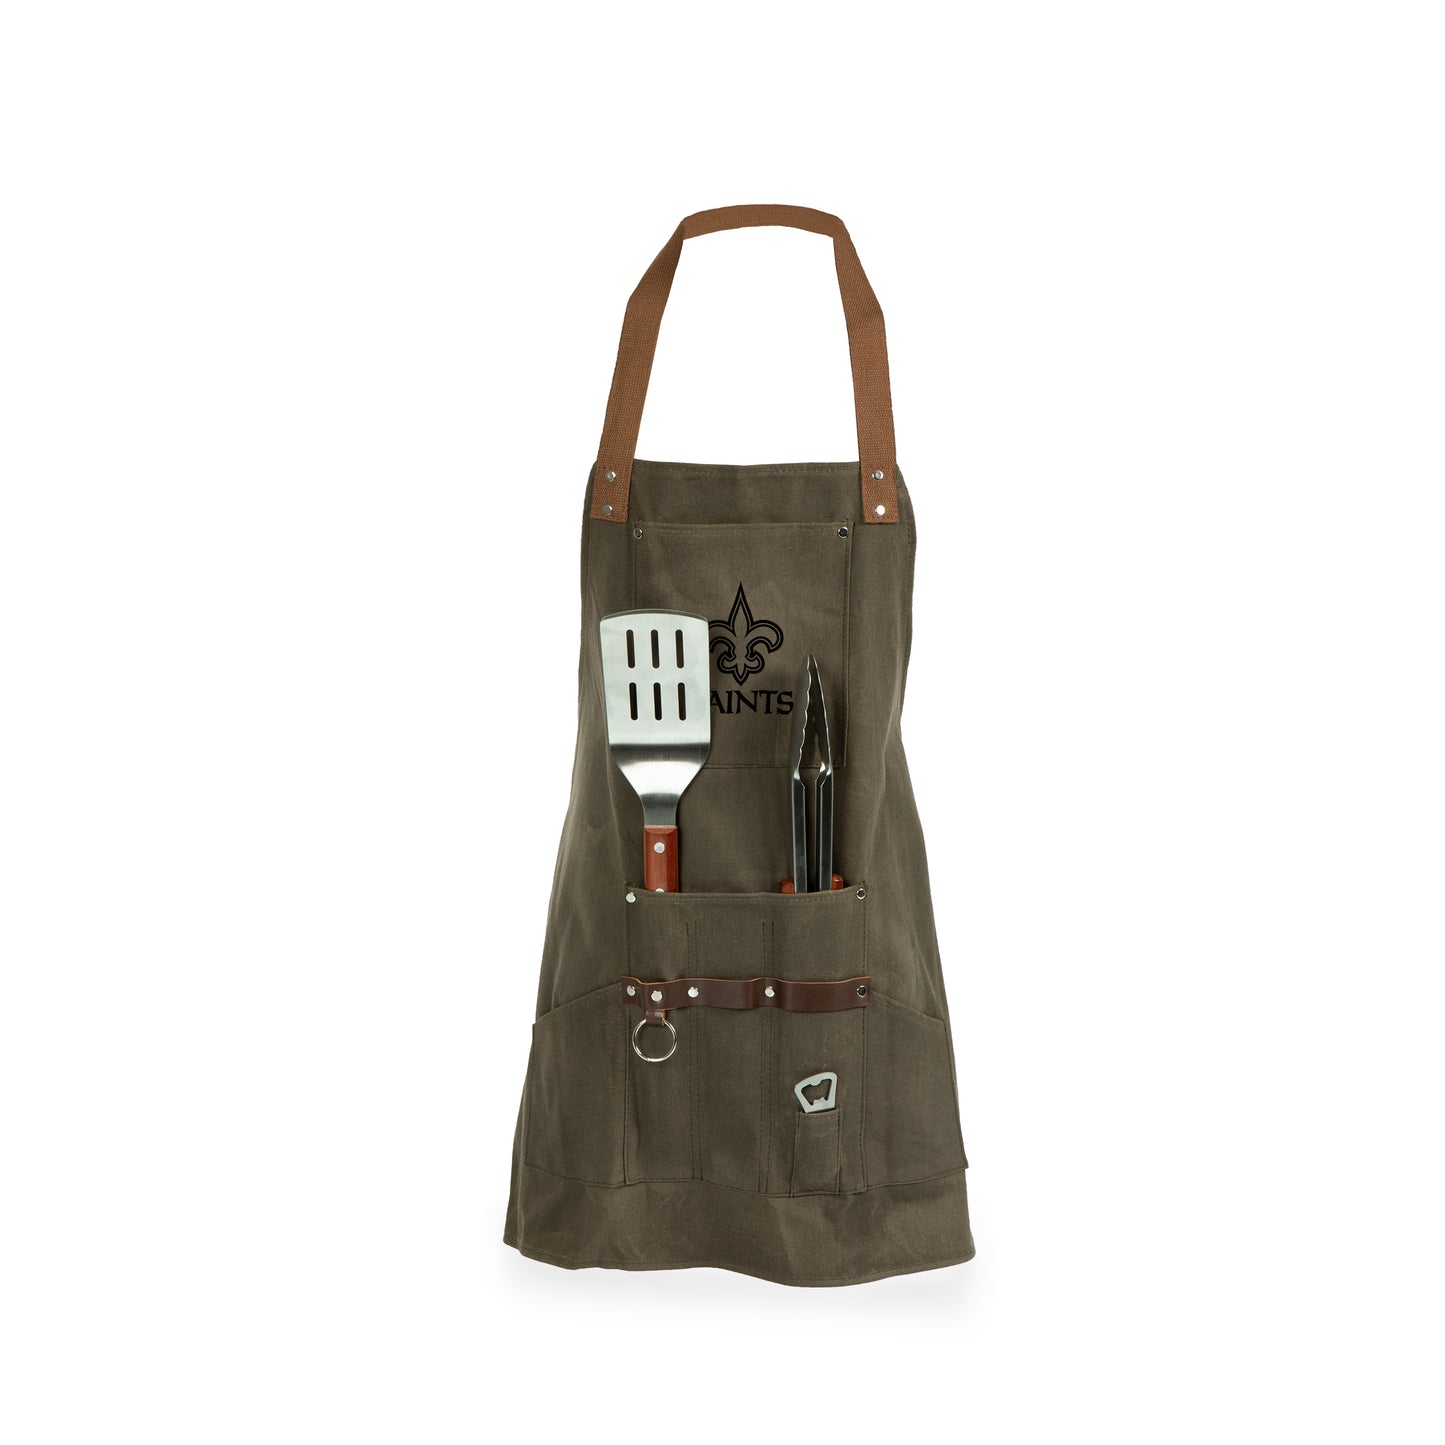 New Orleans Saints - BBQ Apron with Tools & Bottle Opener